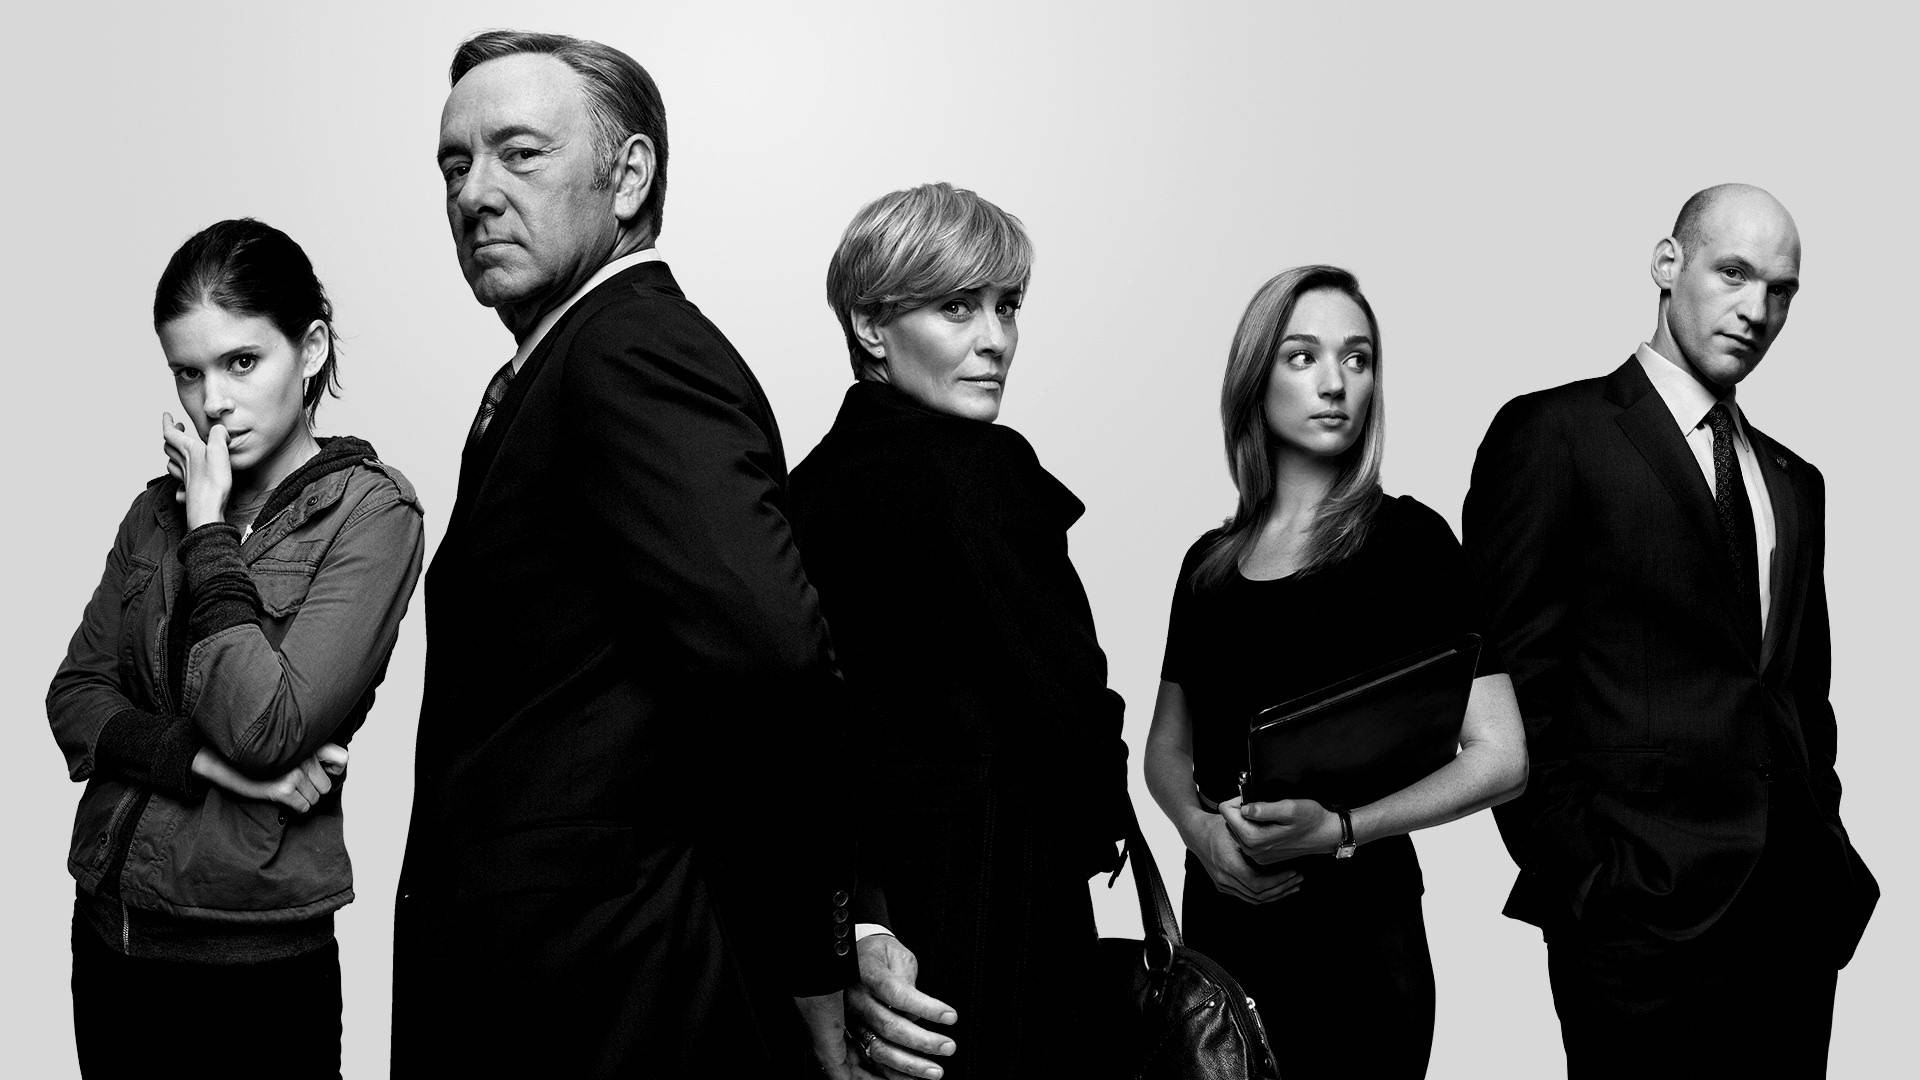 Paarevon House Of Cards Wallpaper